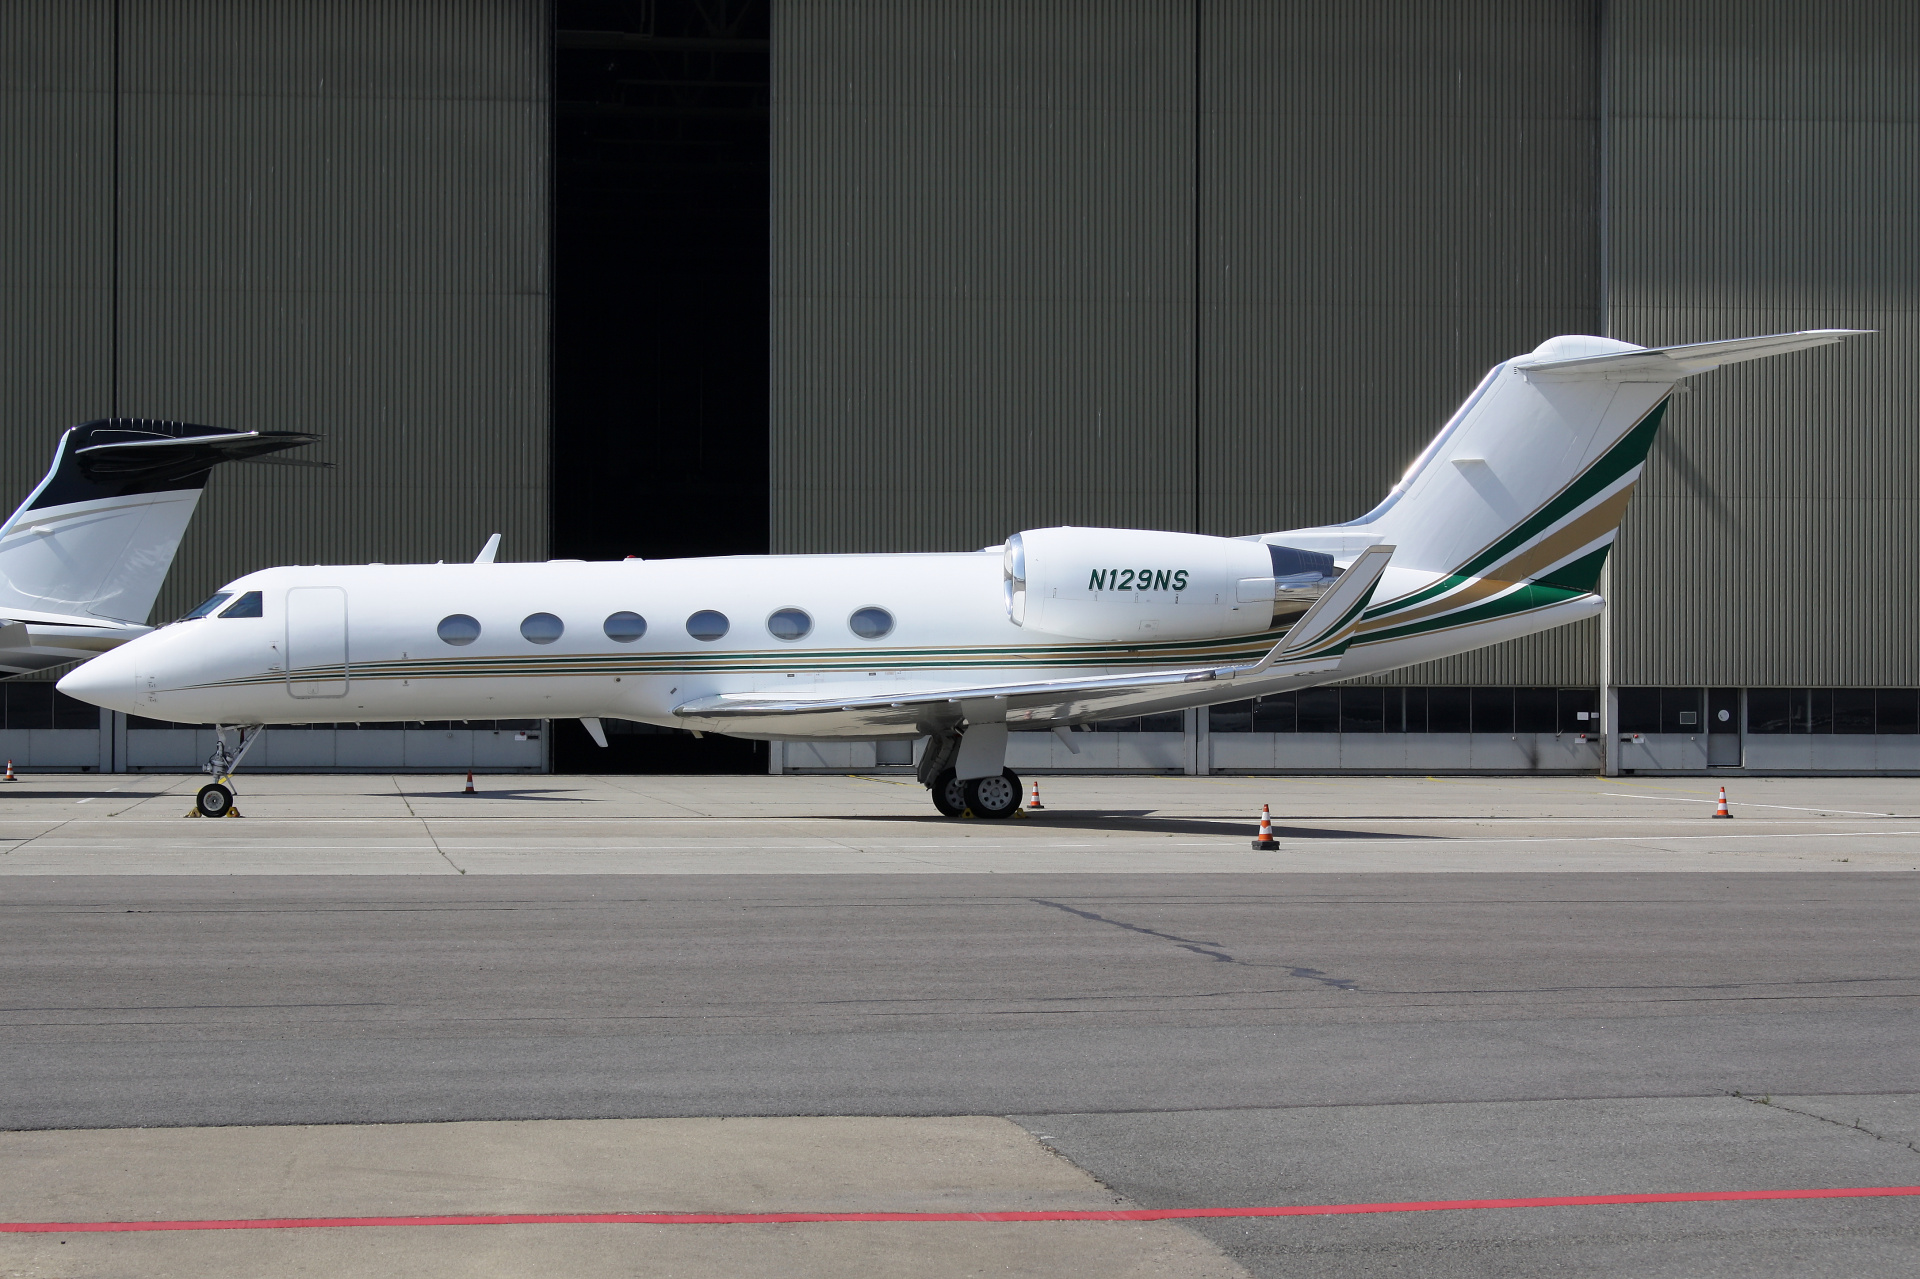 SP, N129NS, Global Air Charters (Aircraft » Schiphol Spotting » Gulfstream IV and revisions)